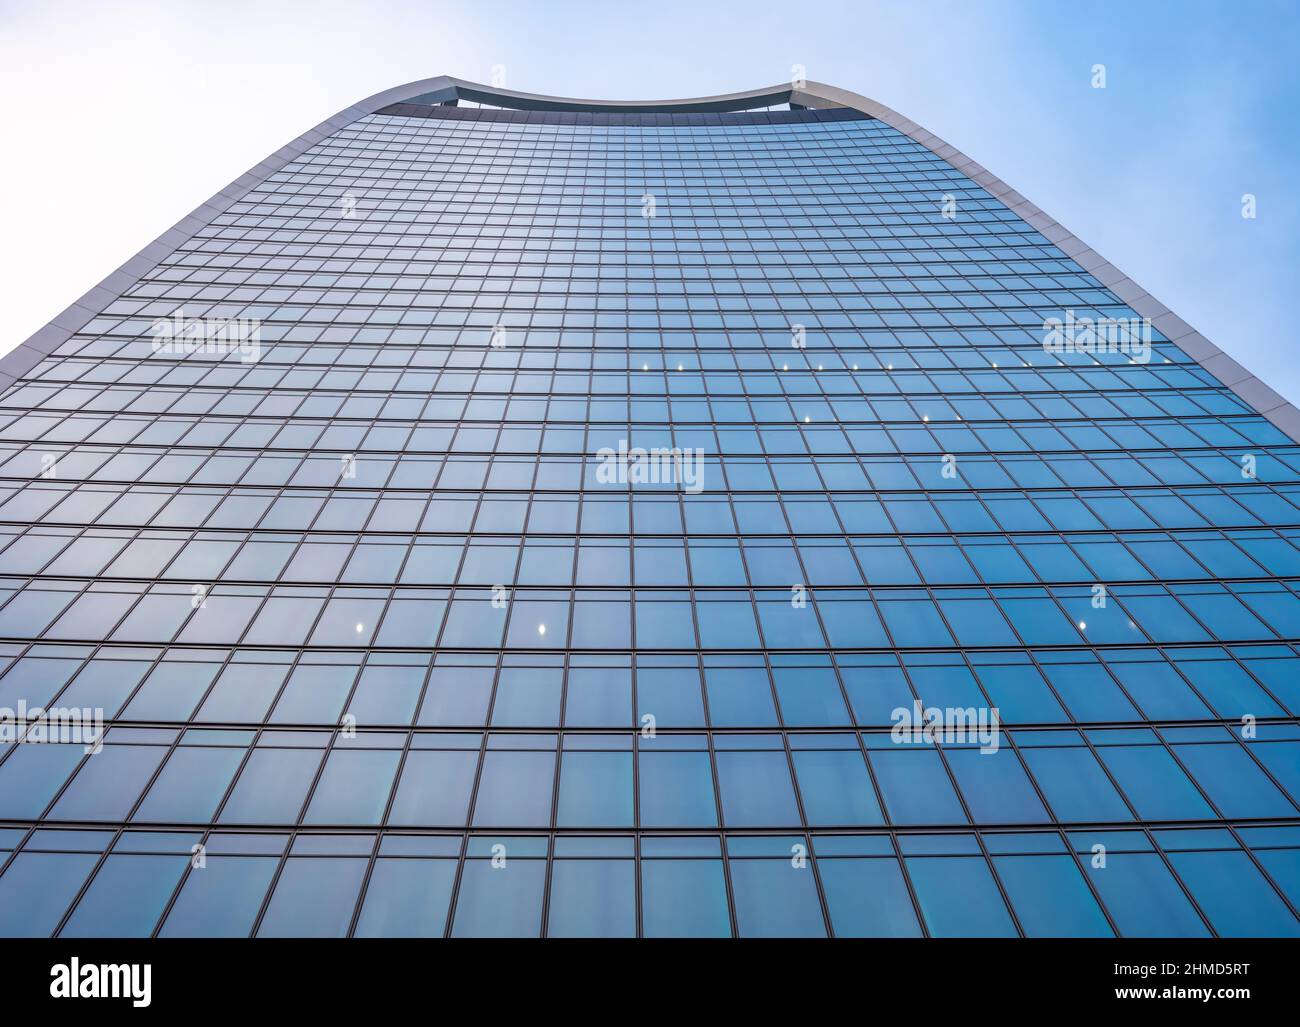 The Walkie-Talkie Building or The Fenchurch Building. Stock Photo